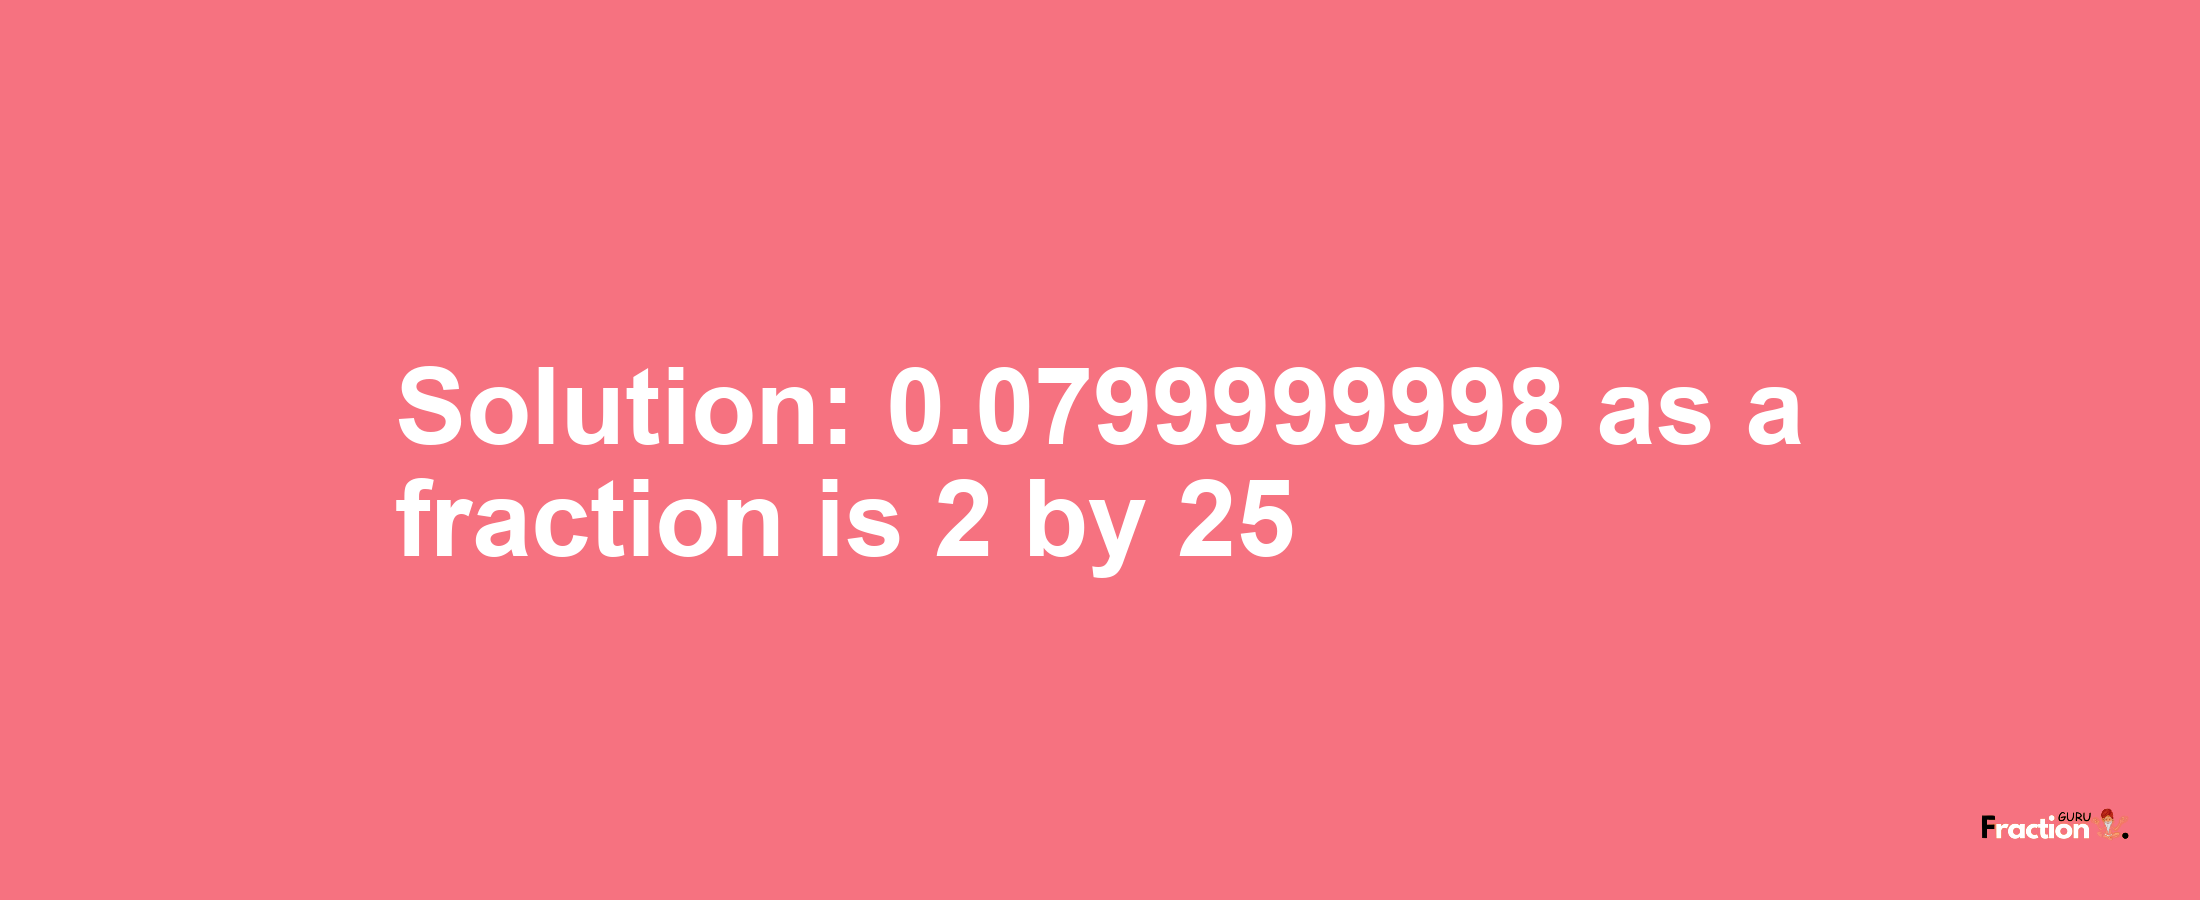 Solution:0.0799999998 as a fraction is 2/25